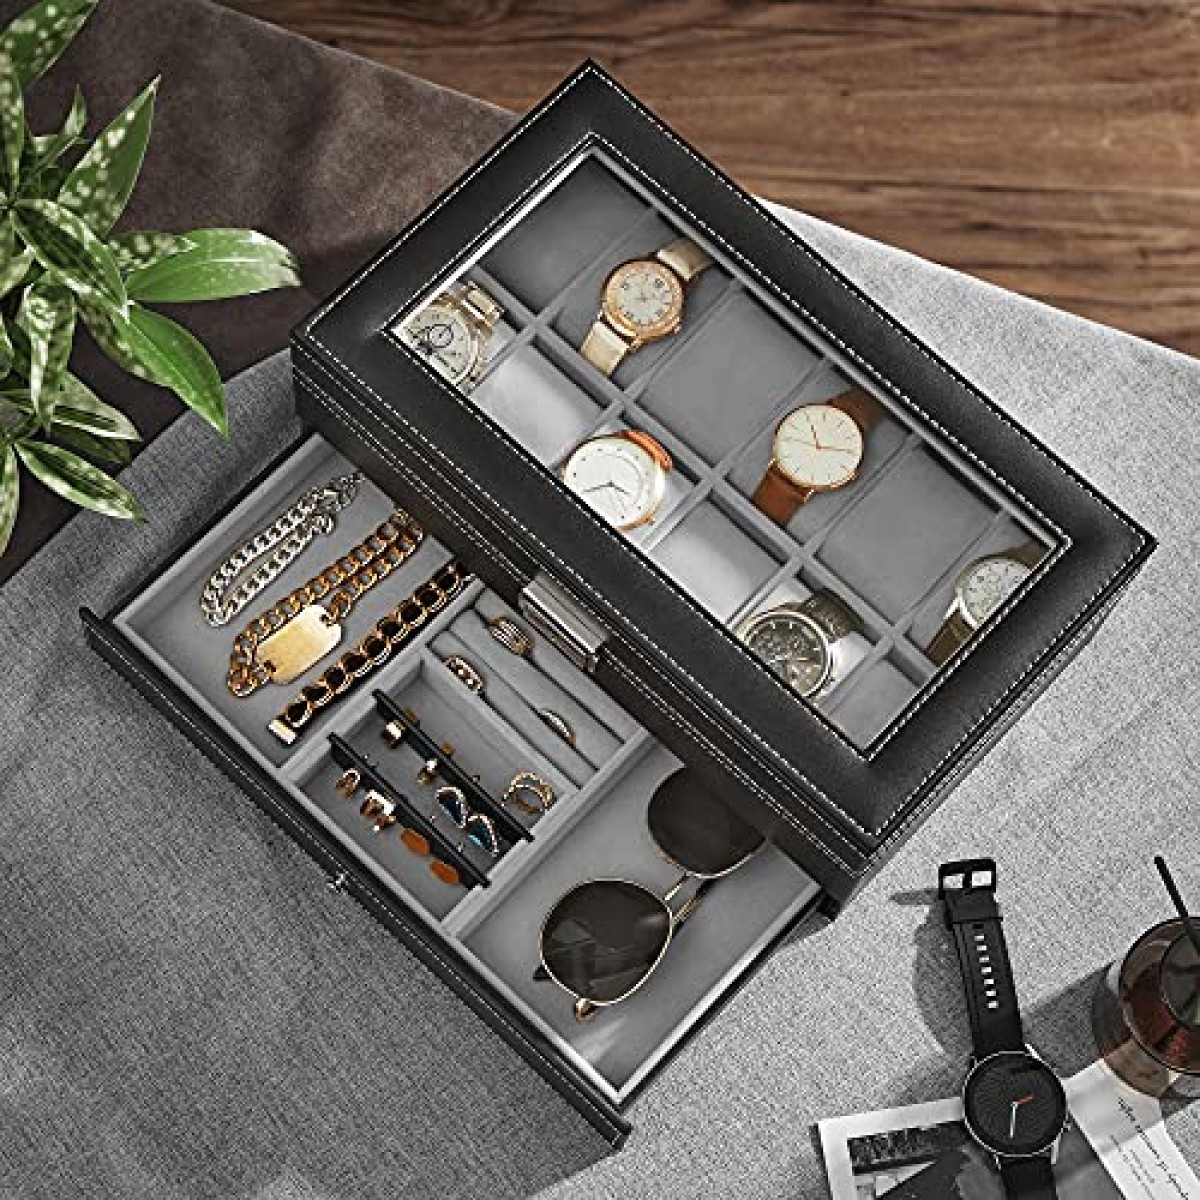 SONGMICS Watch Box, Watch Case with Glass Lid, 2-Tier Watch Display Case for 12 Watches, Lockable, 1 Drawer, for Rings, Bracelets, Gift Idea, Black Synthetic Leather, Grey Lining JWB012G01